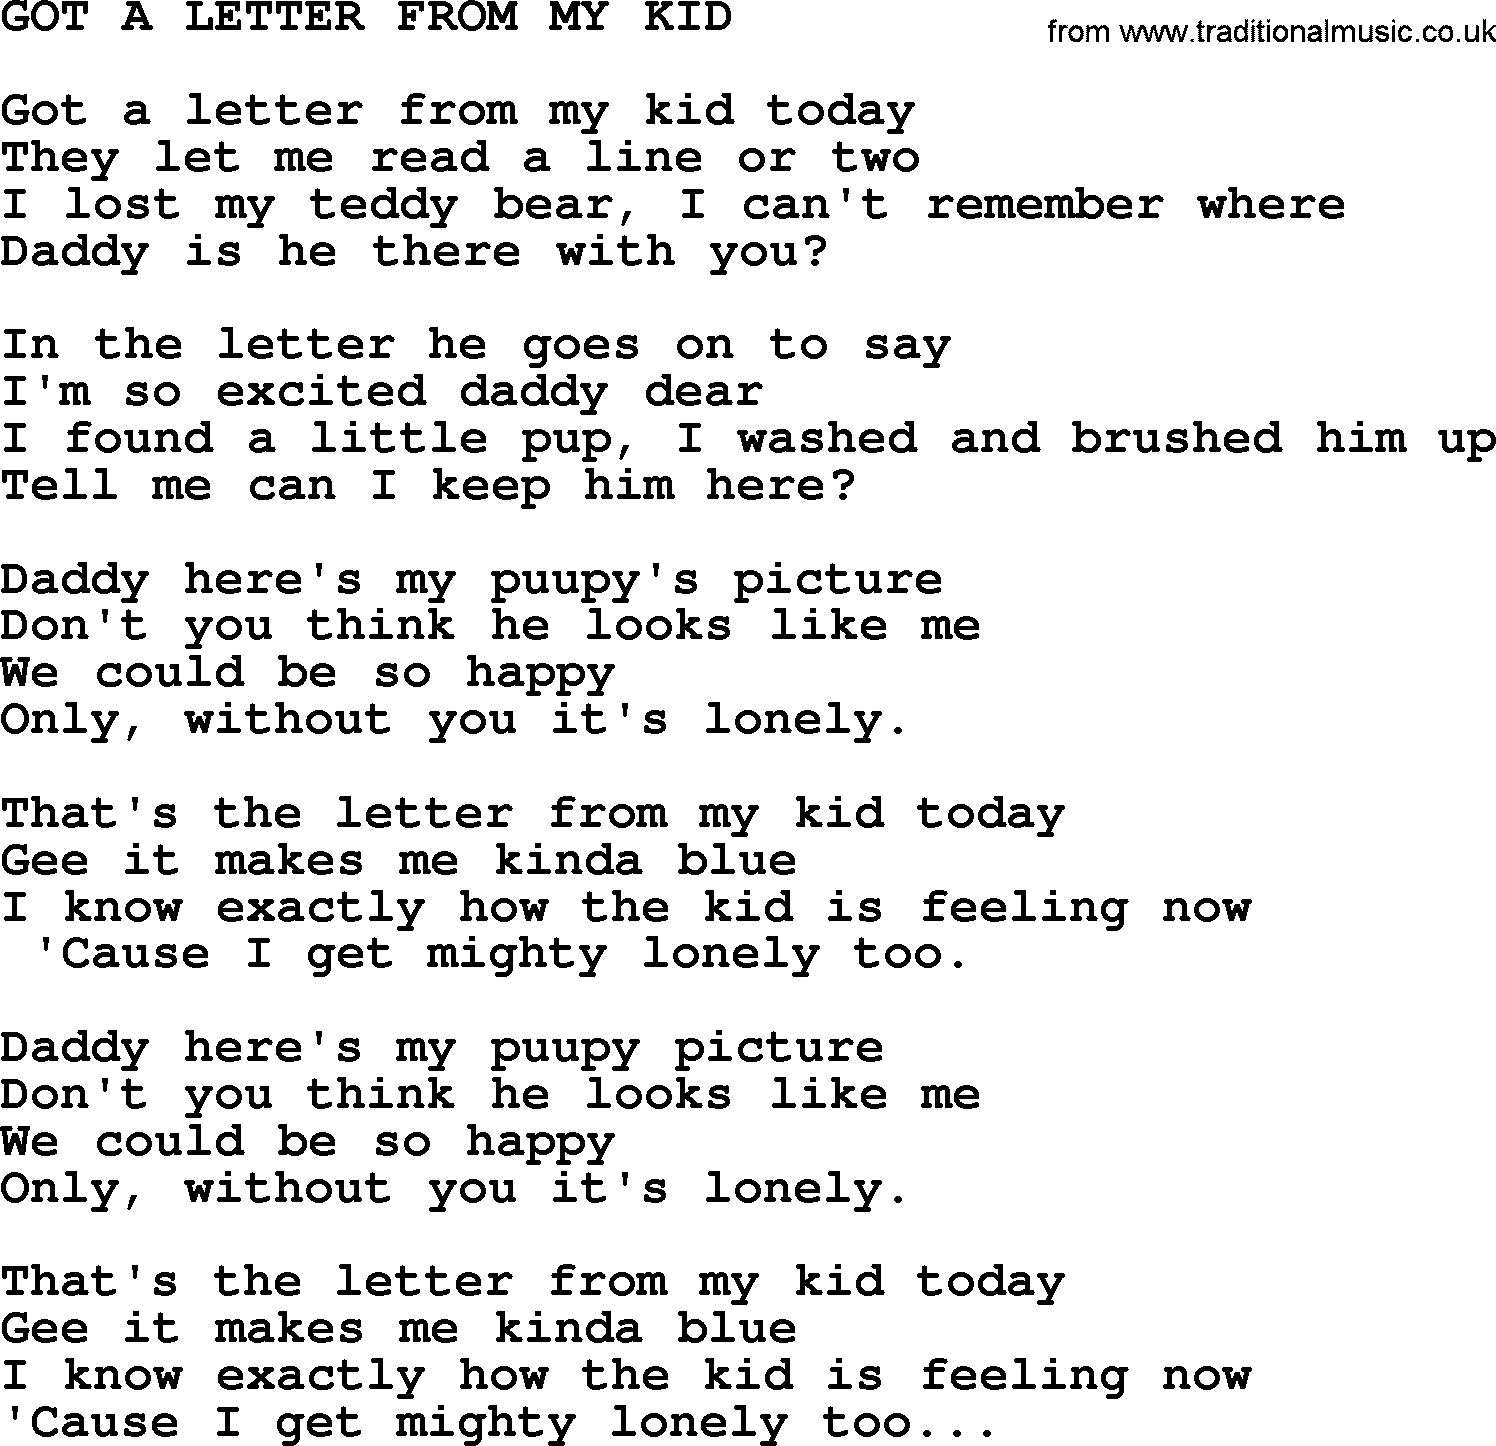 Merle Haggard song: Got A Letter From My Kid, lyrics.